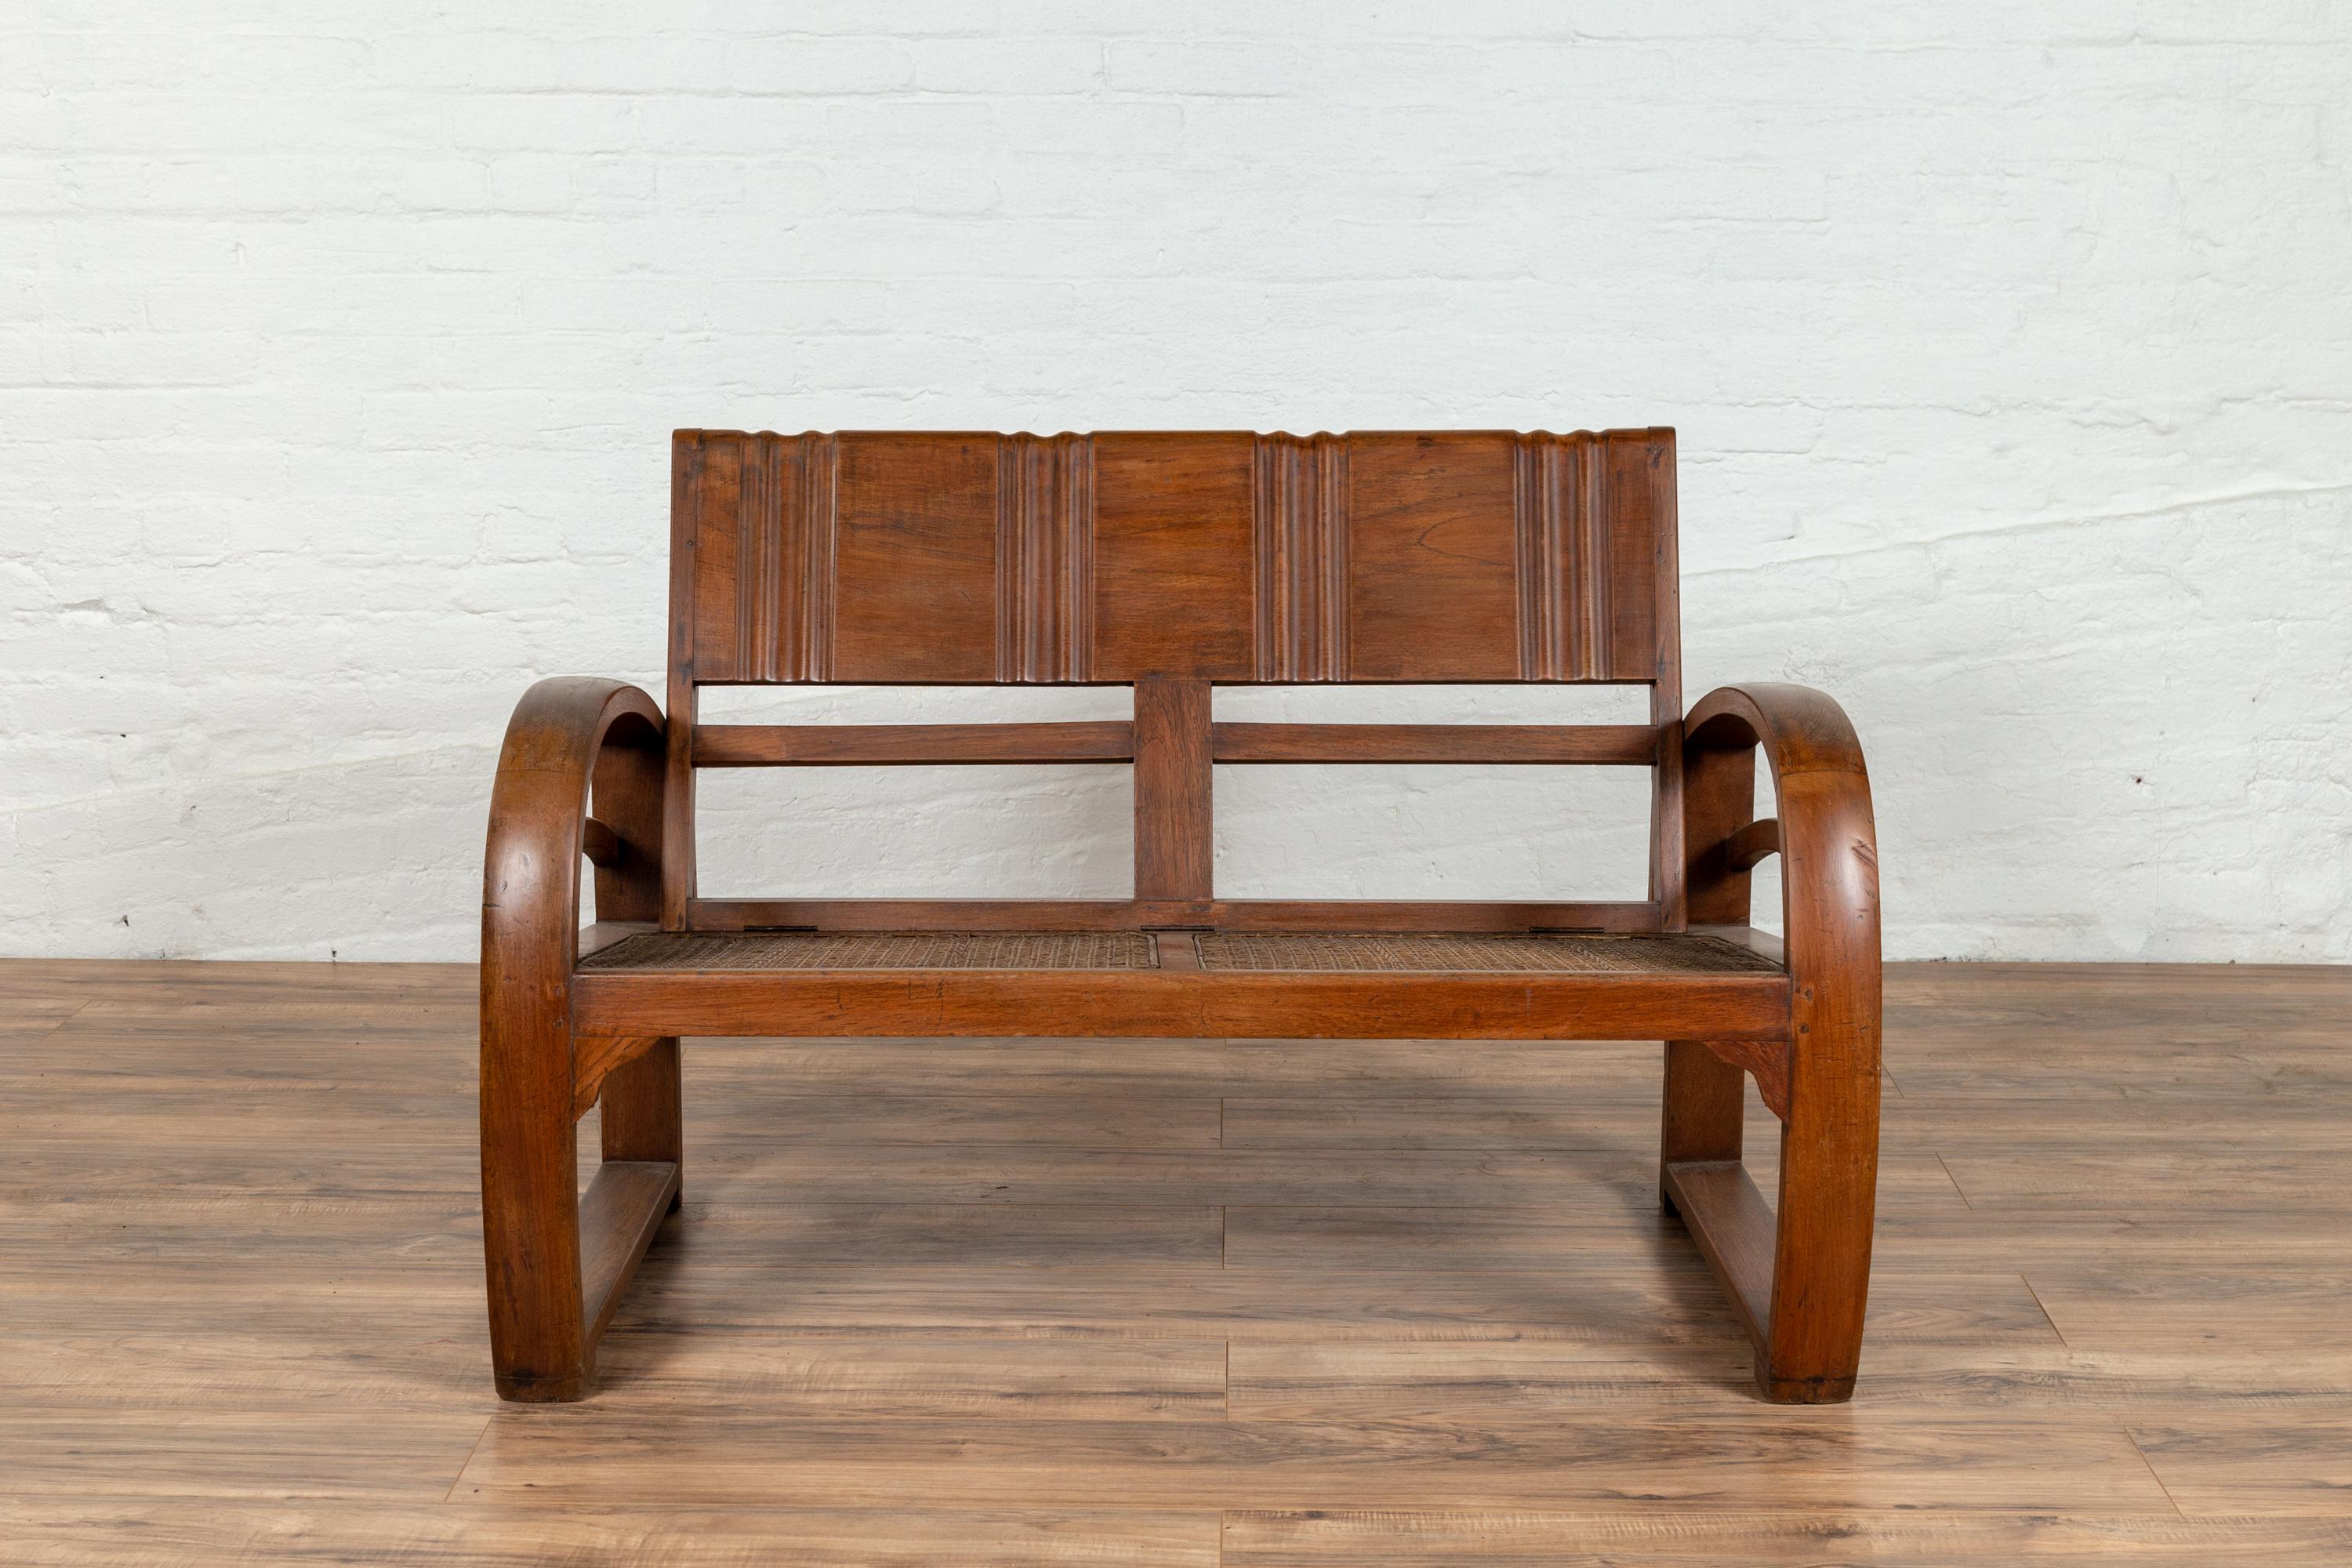 An antique Indonesian teak wood settee from the early 20th century, with cane two-seater and looping arms. Found in Madura, this early 20th century teak settee features a rectangular back with reeded accents that conveniently folds to rest on the